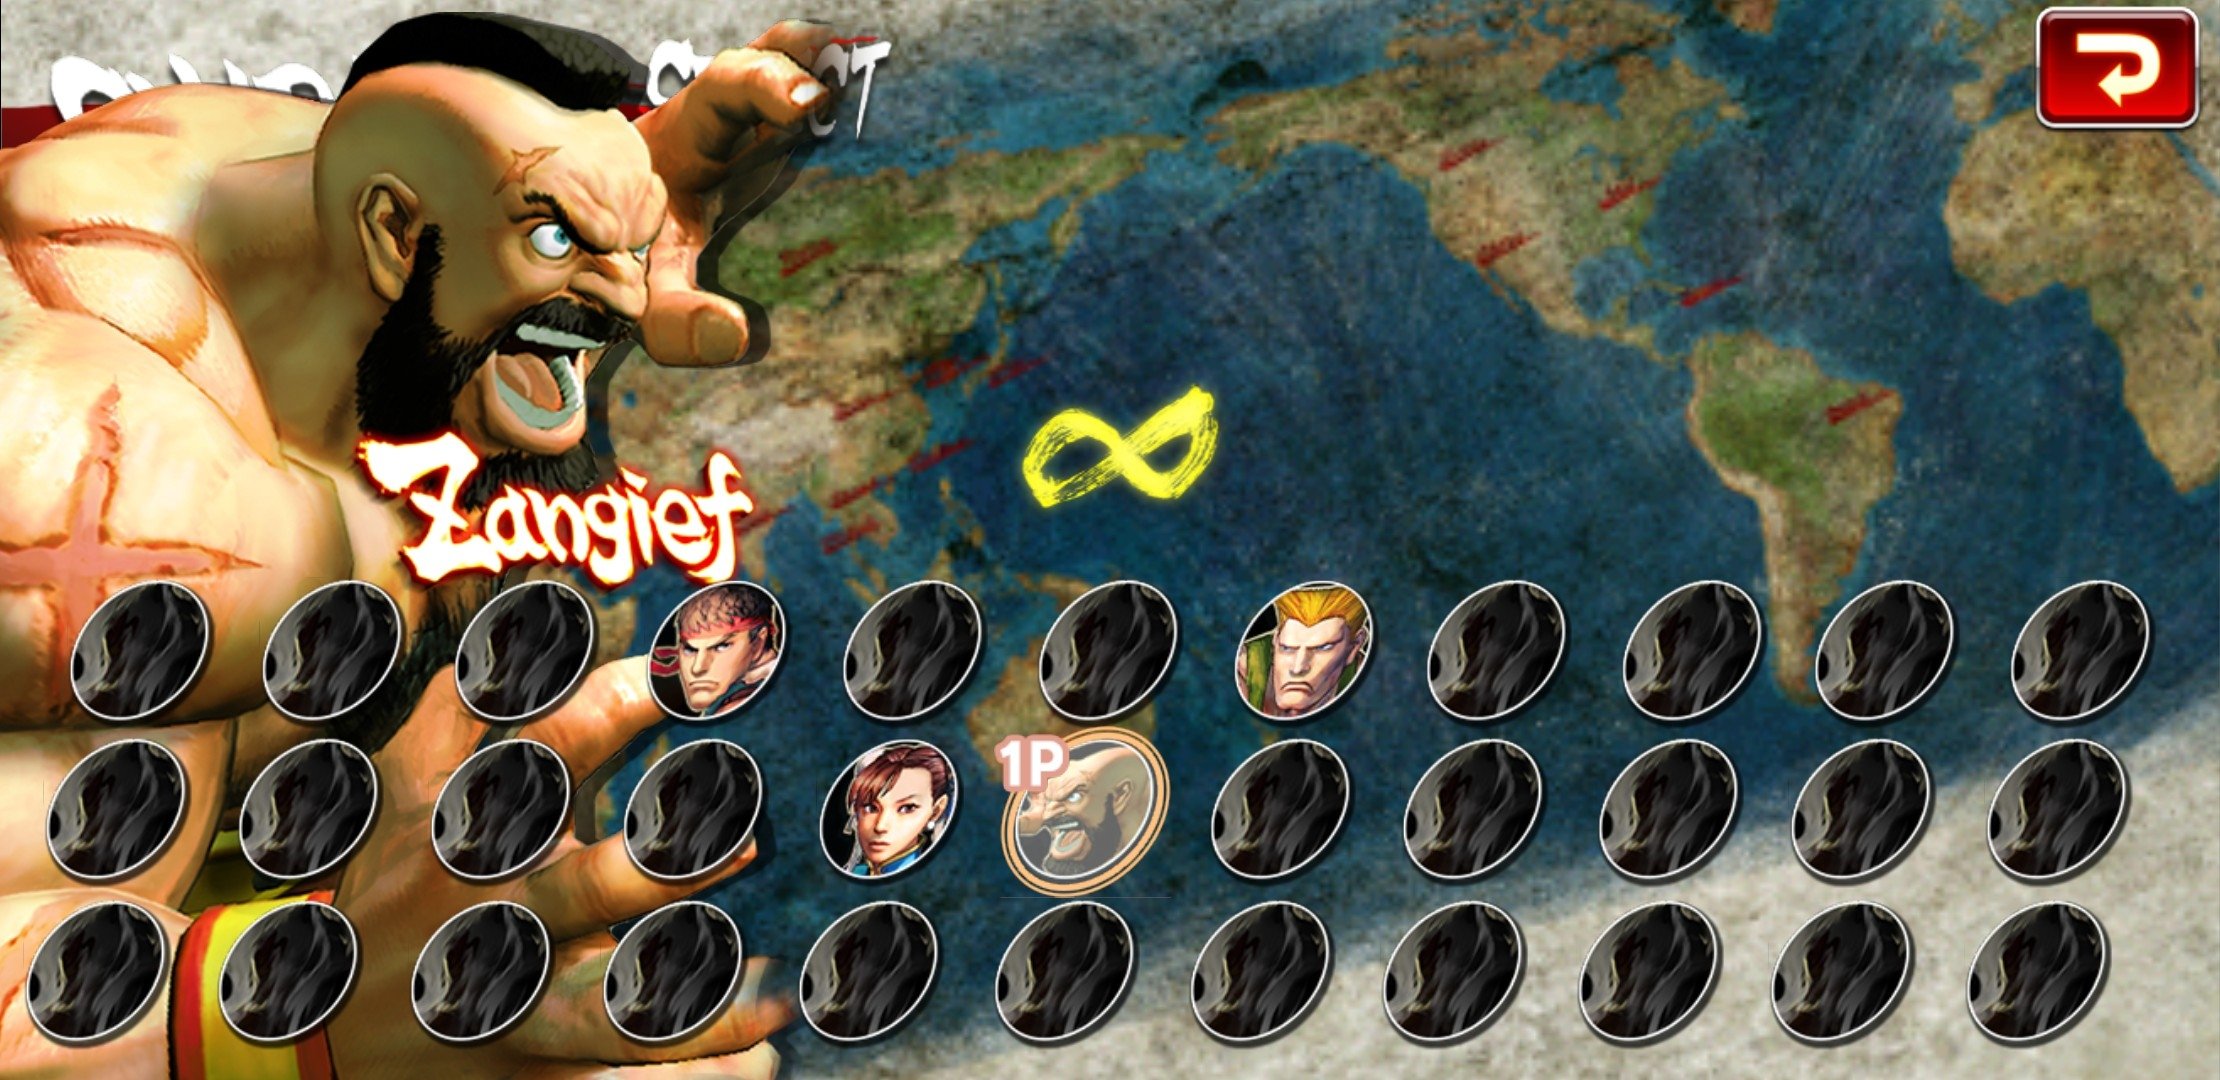 How to Download Street Fighter IV CE on Android